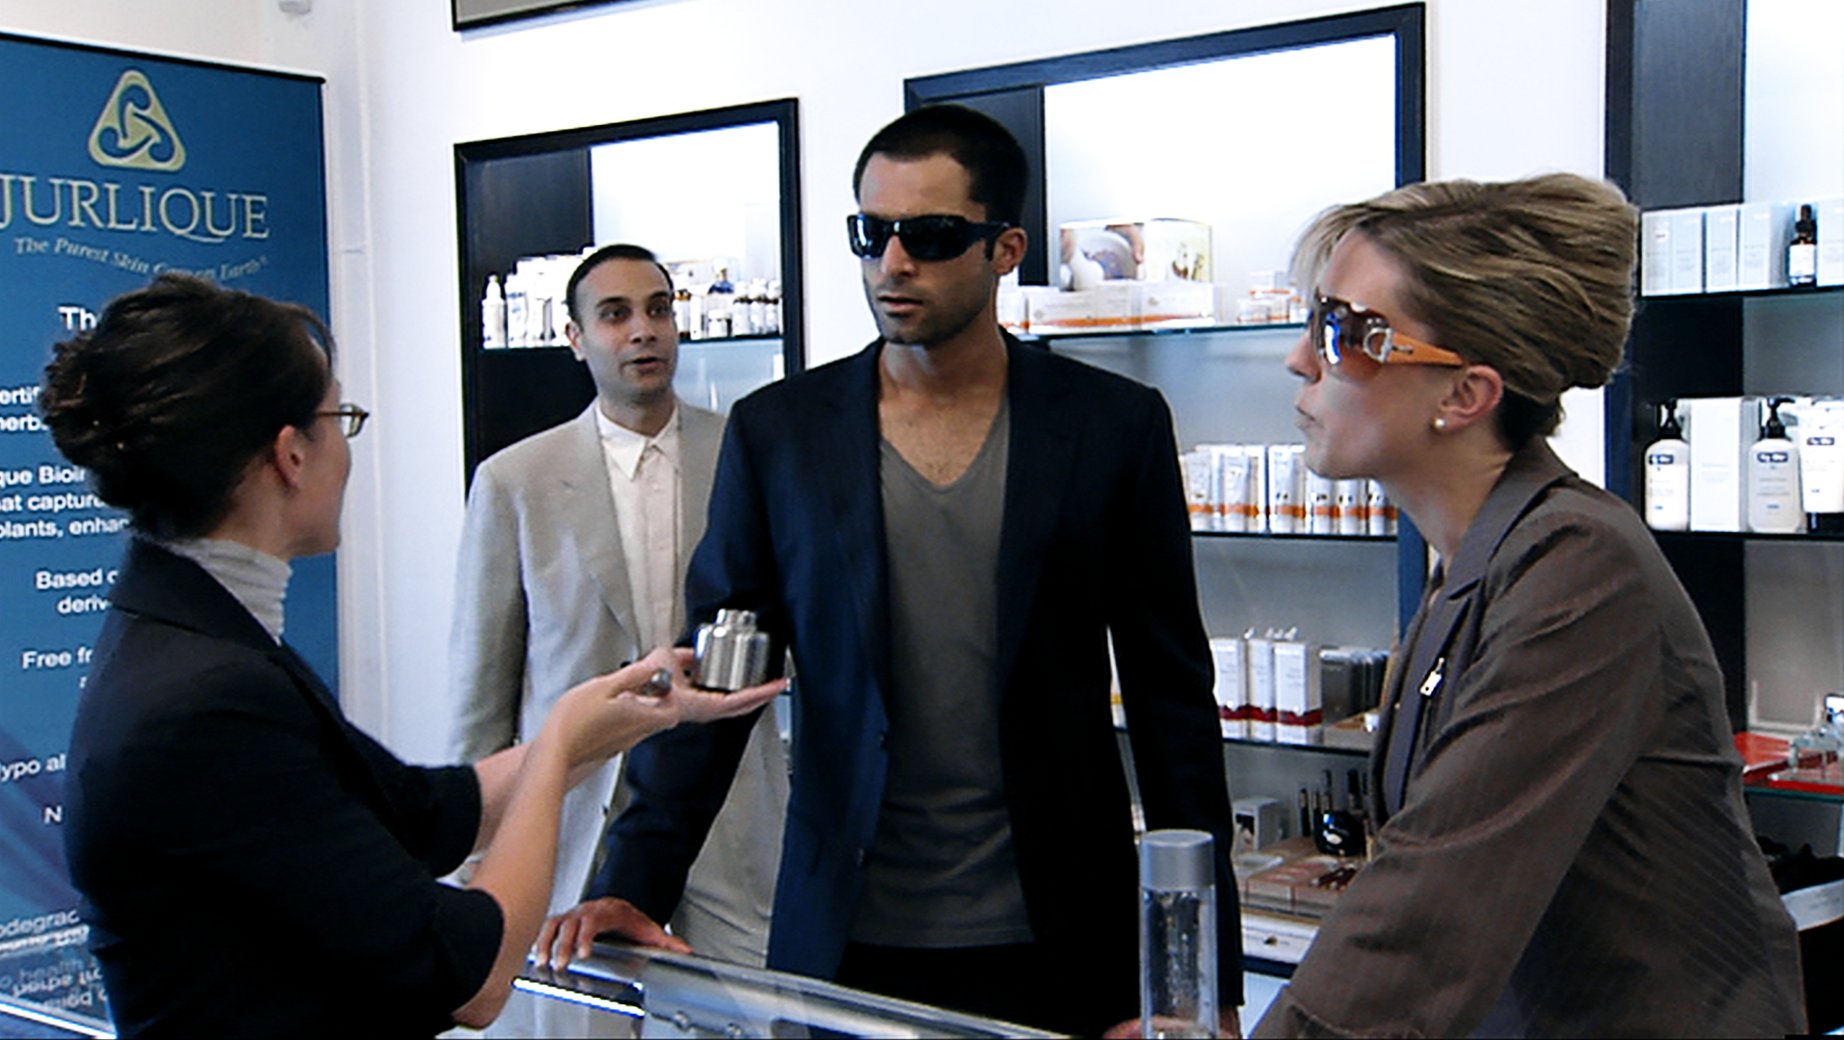 HD still from WHO'S GOOD LOOKING? written and directed by Warren Pereira showing Karamooz, Pereira, Talbot and O'Grady.